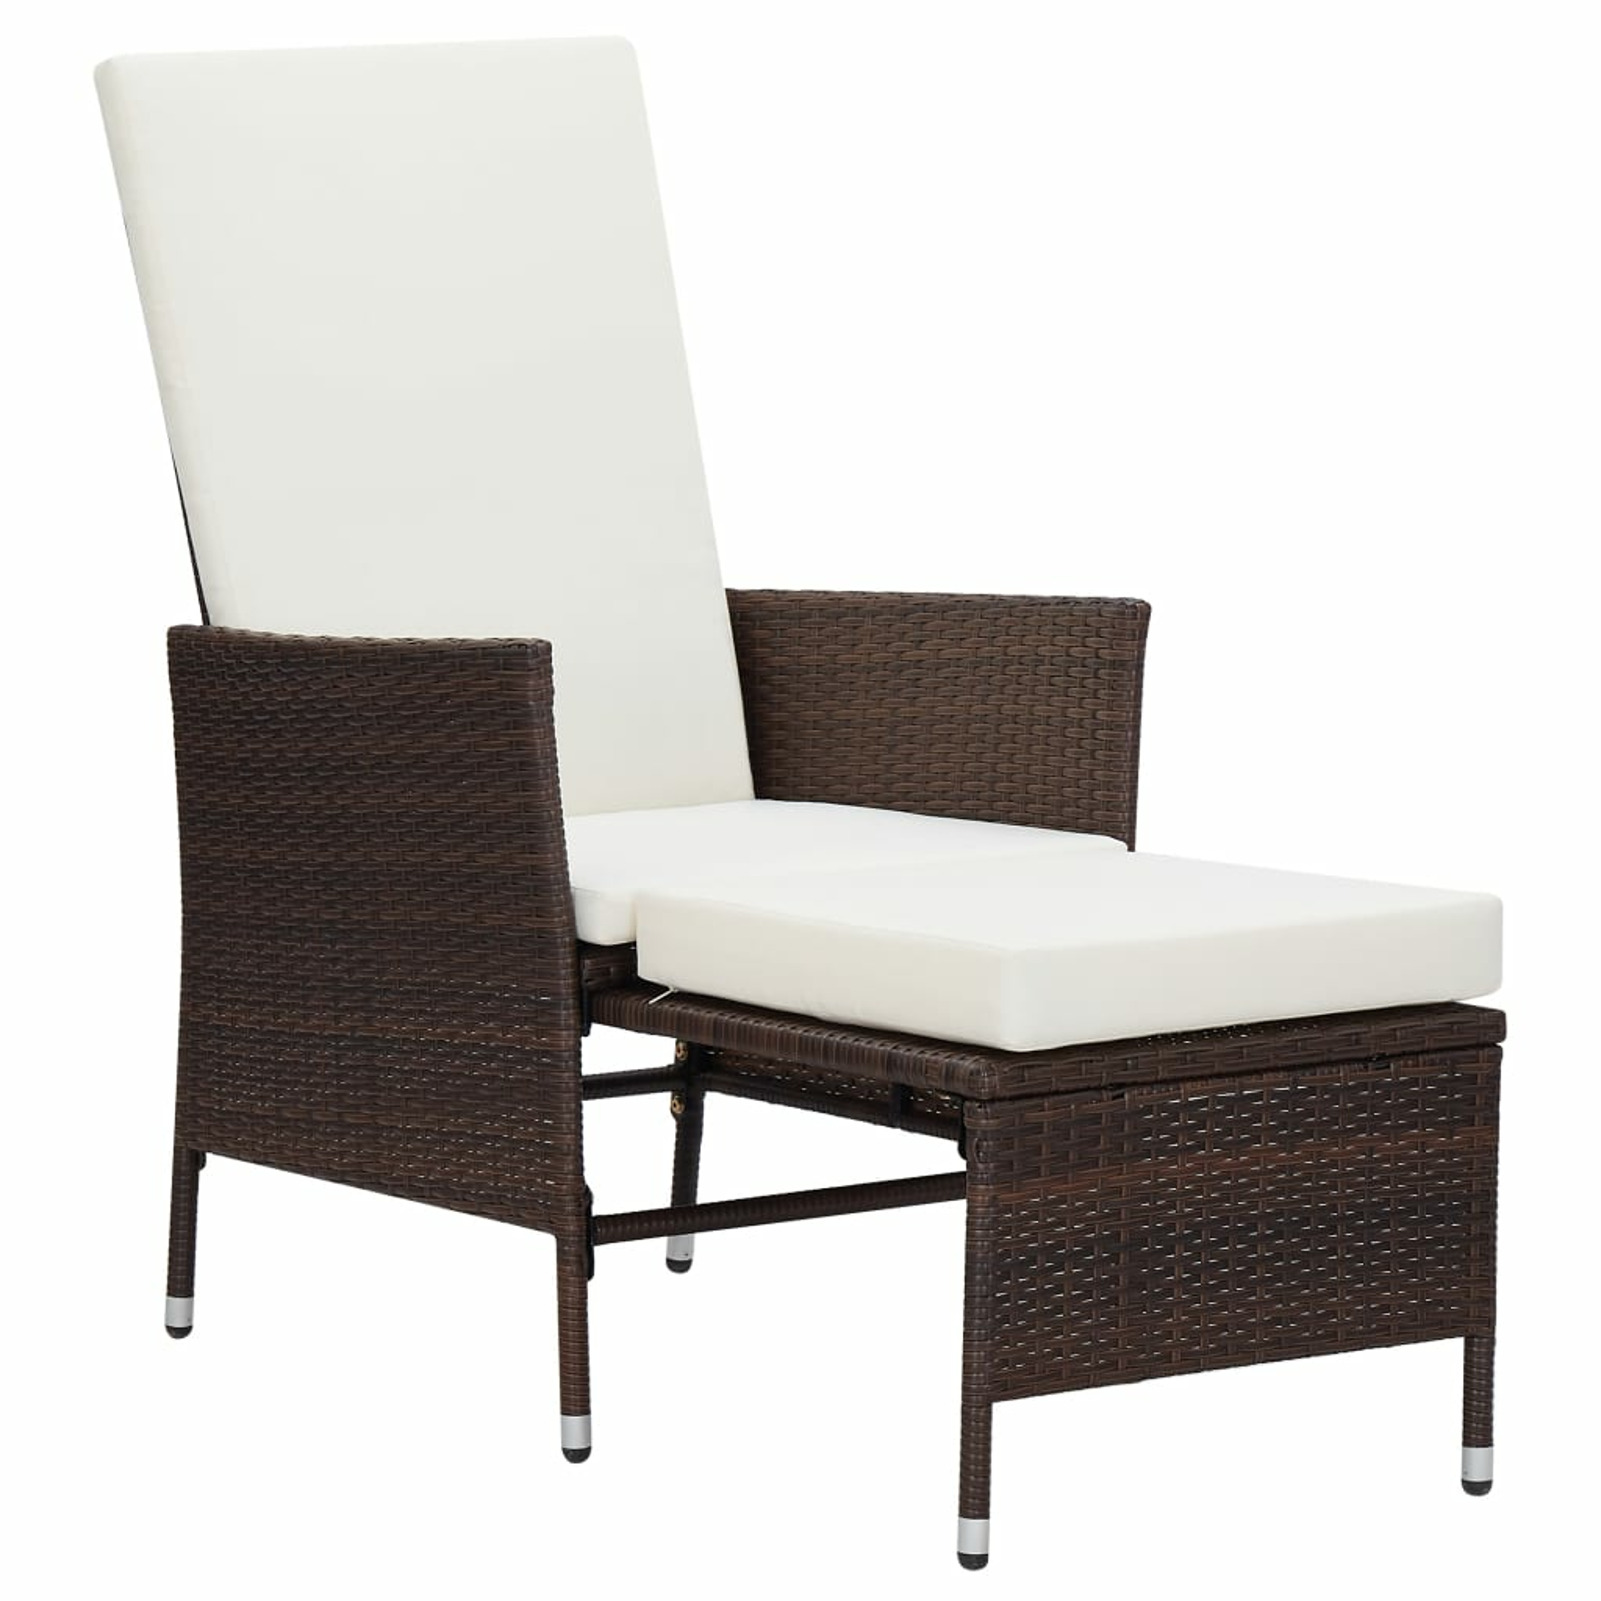 Anself Garden Reclining Chair Brown Poly Rattan Armchair with Padded Cushions and Built-in Footrest Steel Frame for Patio, Poolside, Backyard, Balcony Outdoor Furniture - image 2 of 7